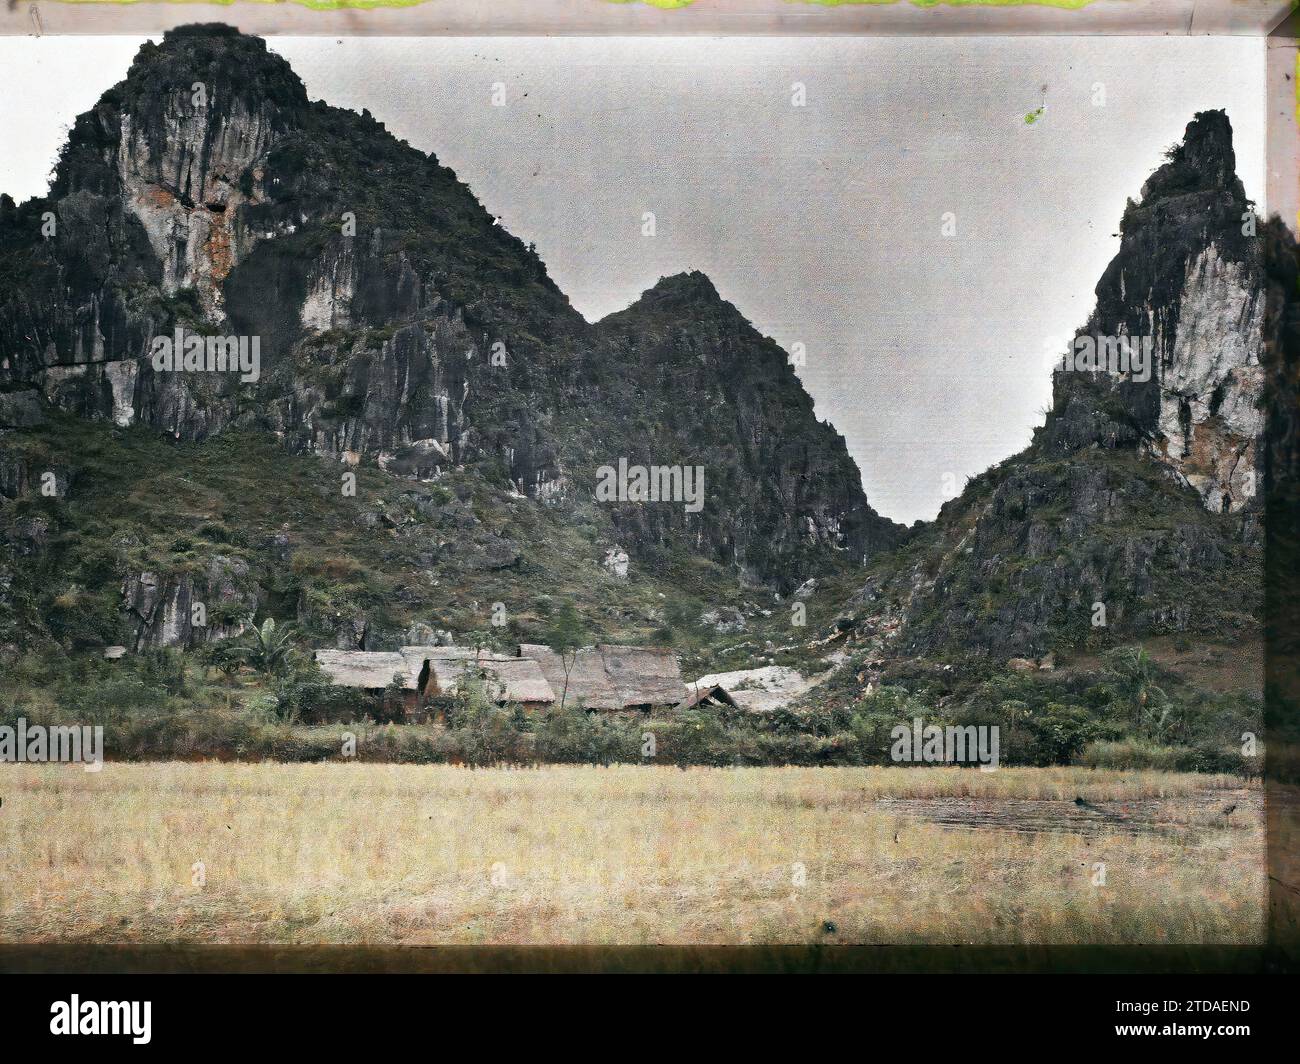 Ky-lu' a, province of Lang-so' n, Tonkin, Indochina The village at the foot of the Rocks of Ky-lu' a, Nature, Environment, Economic activity, Habitat, Architecture, Landscape, Mount, mountain, Agriculture, livestock, Roof, Rural architecture, Cave, Panorama of urban area, Indochina, Tonkin, Ky-lua, From Hanoi to China Gate, The Caves of Ky-lua, View of the village at the foot of the rocks, Ky-Lua, 01/09/1915 - 30/11/1915, Busy, Léon, Léon Busy photographer en Indochine, Autochrome, photo, Glass, Autochrome, photo, Positive, Horizontal, Size 9 x 12 cm Stock Photo